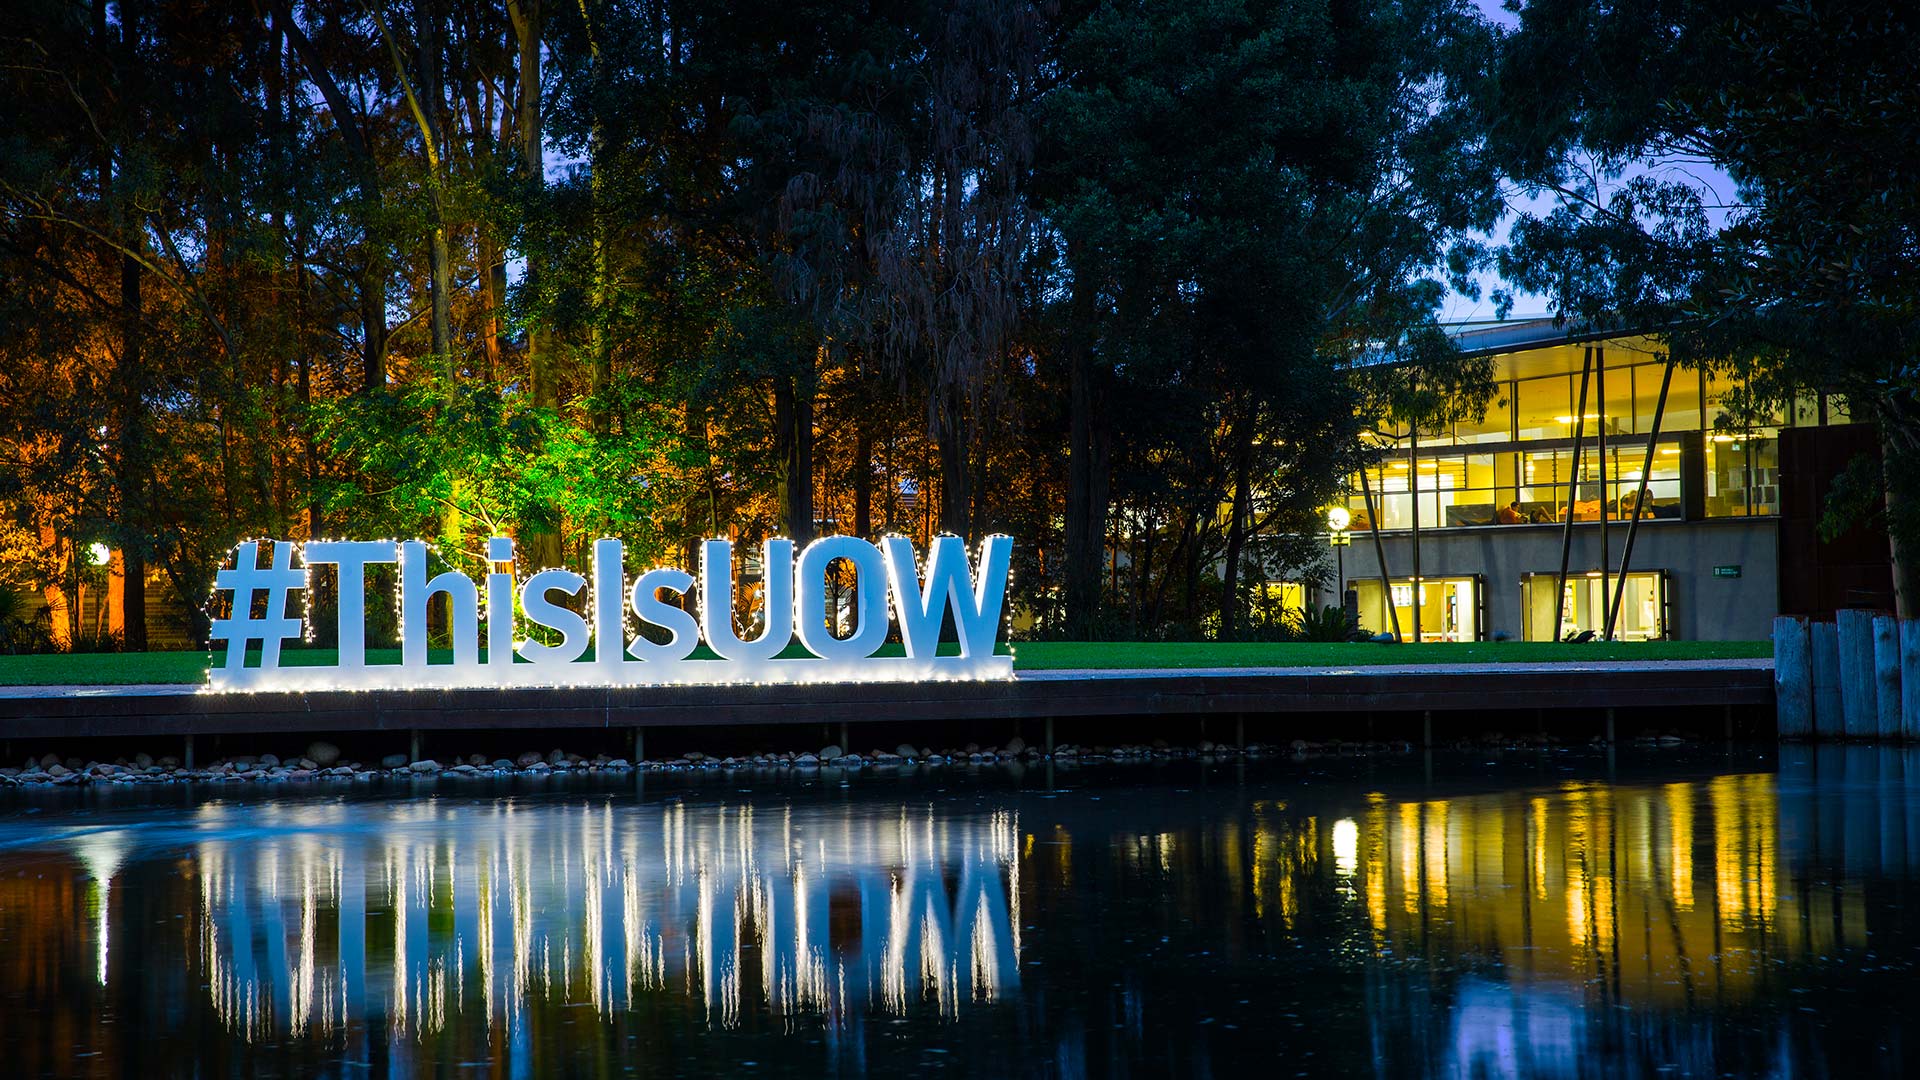 UOW Wollongong Campus duck pond lawn by night with #ThisIsUOW